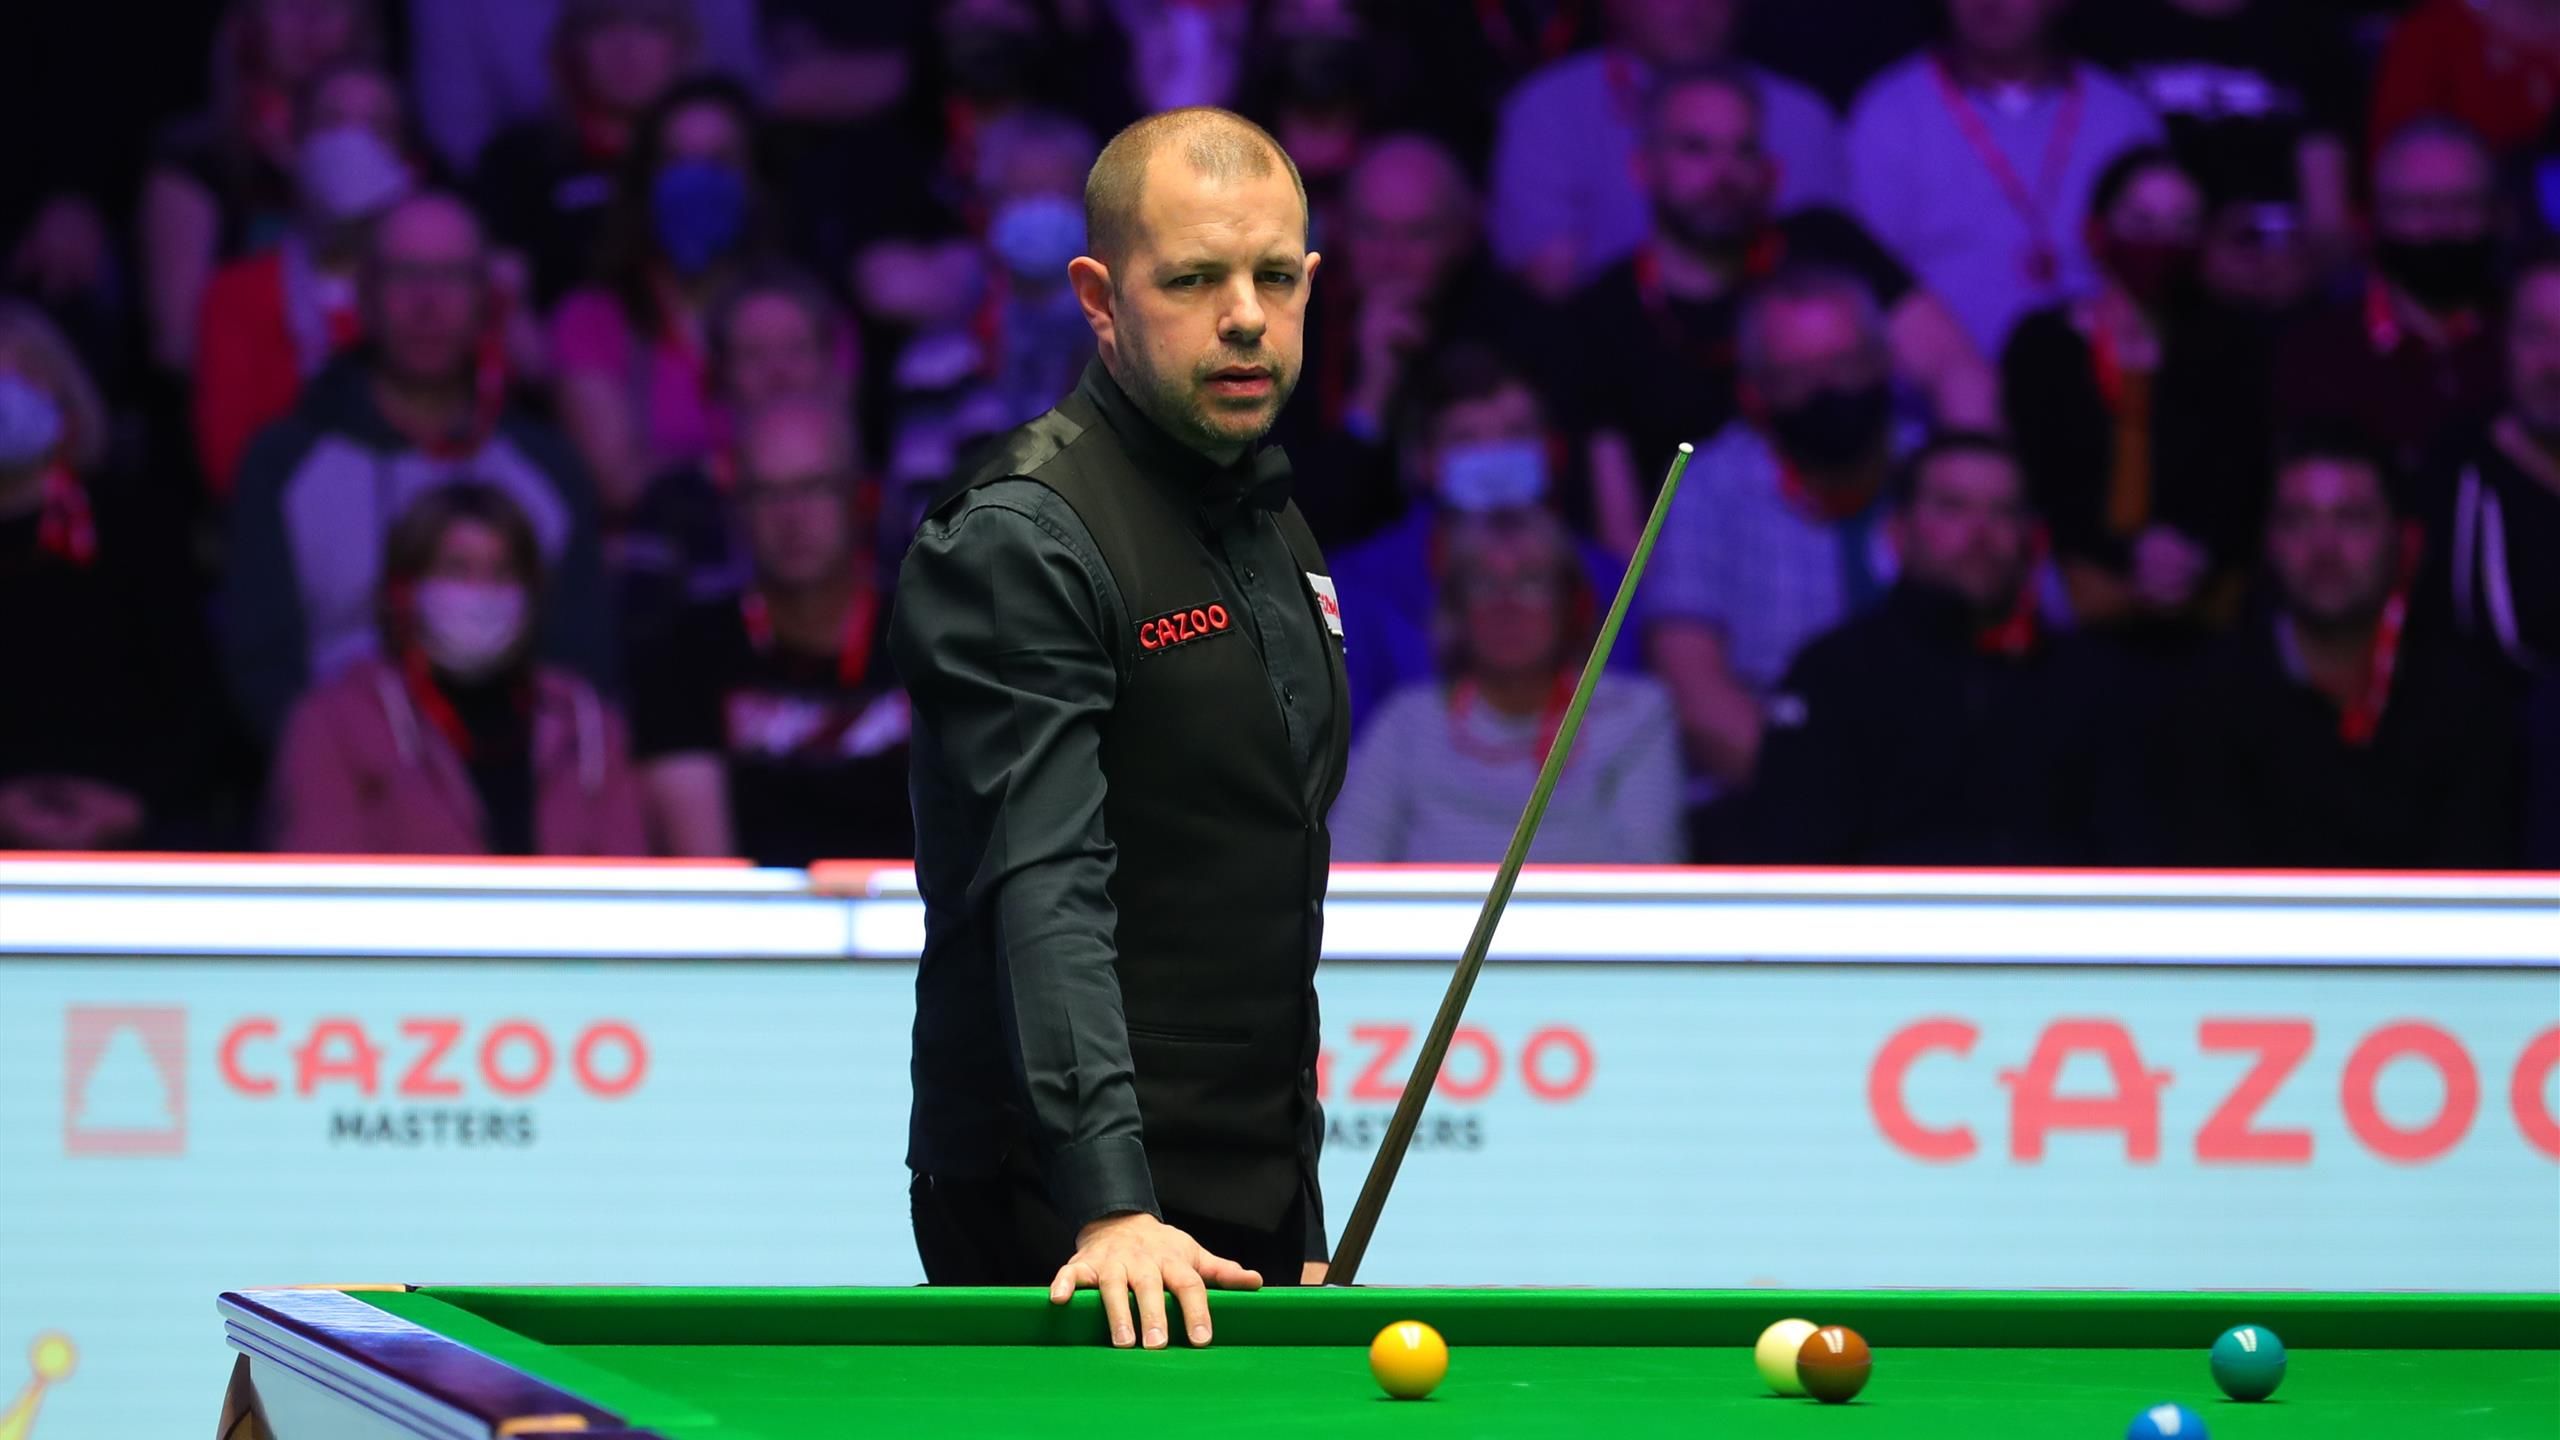 Masters snooker 2022 LIVE Barry Hawkins to face Neil Robertson in final after epic semi-final win over Judd Trump